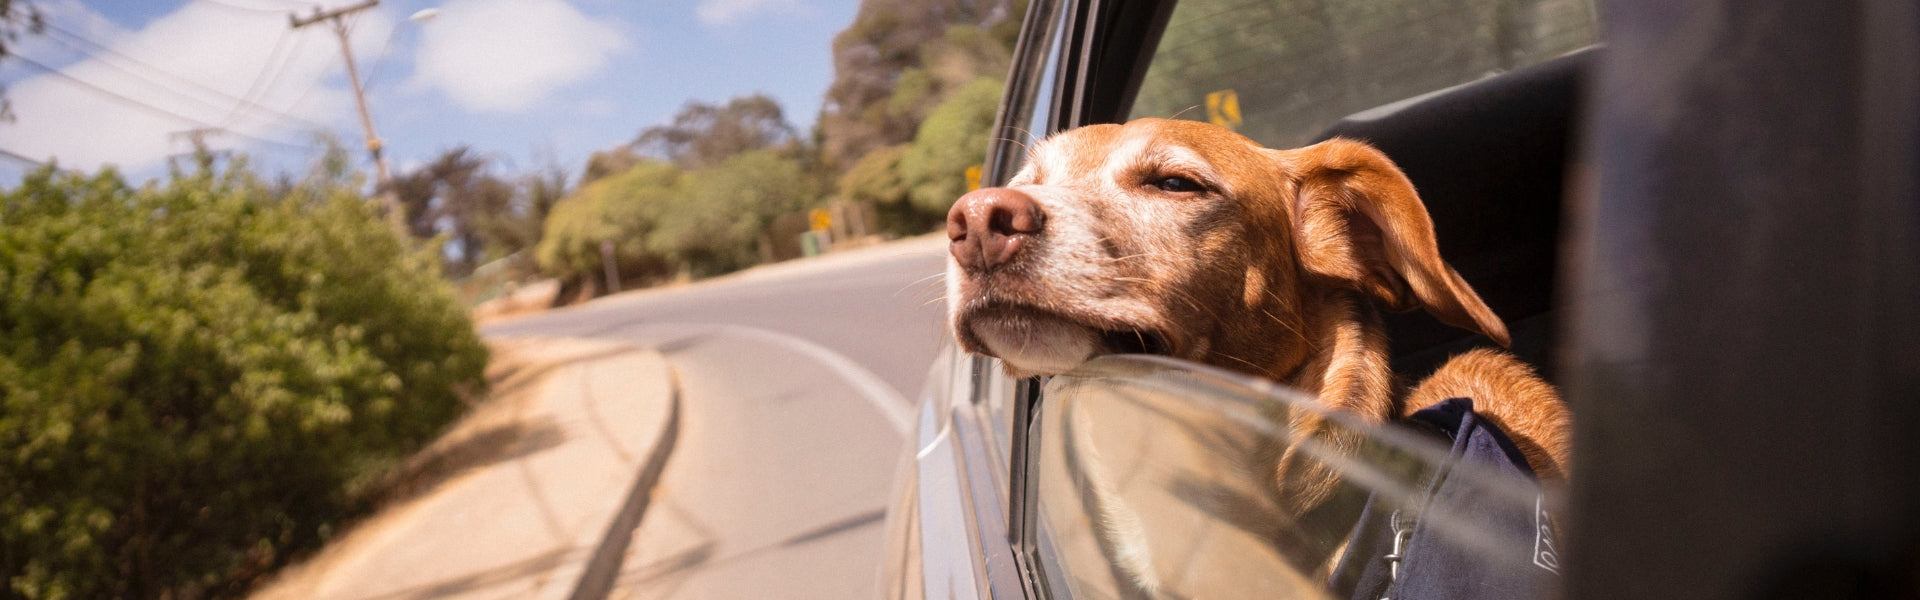 Is your dog afraid of car rides? Learn how to calm your dog's car anxiety